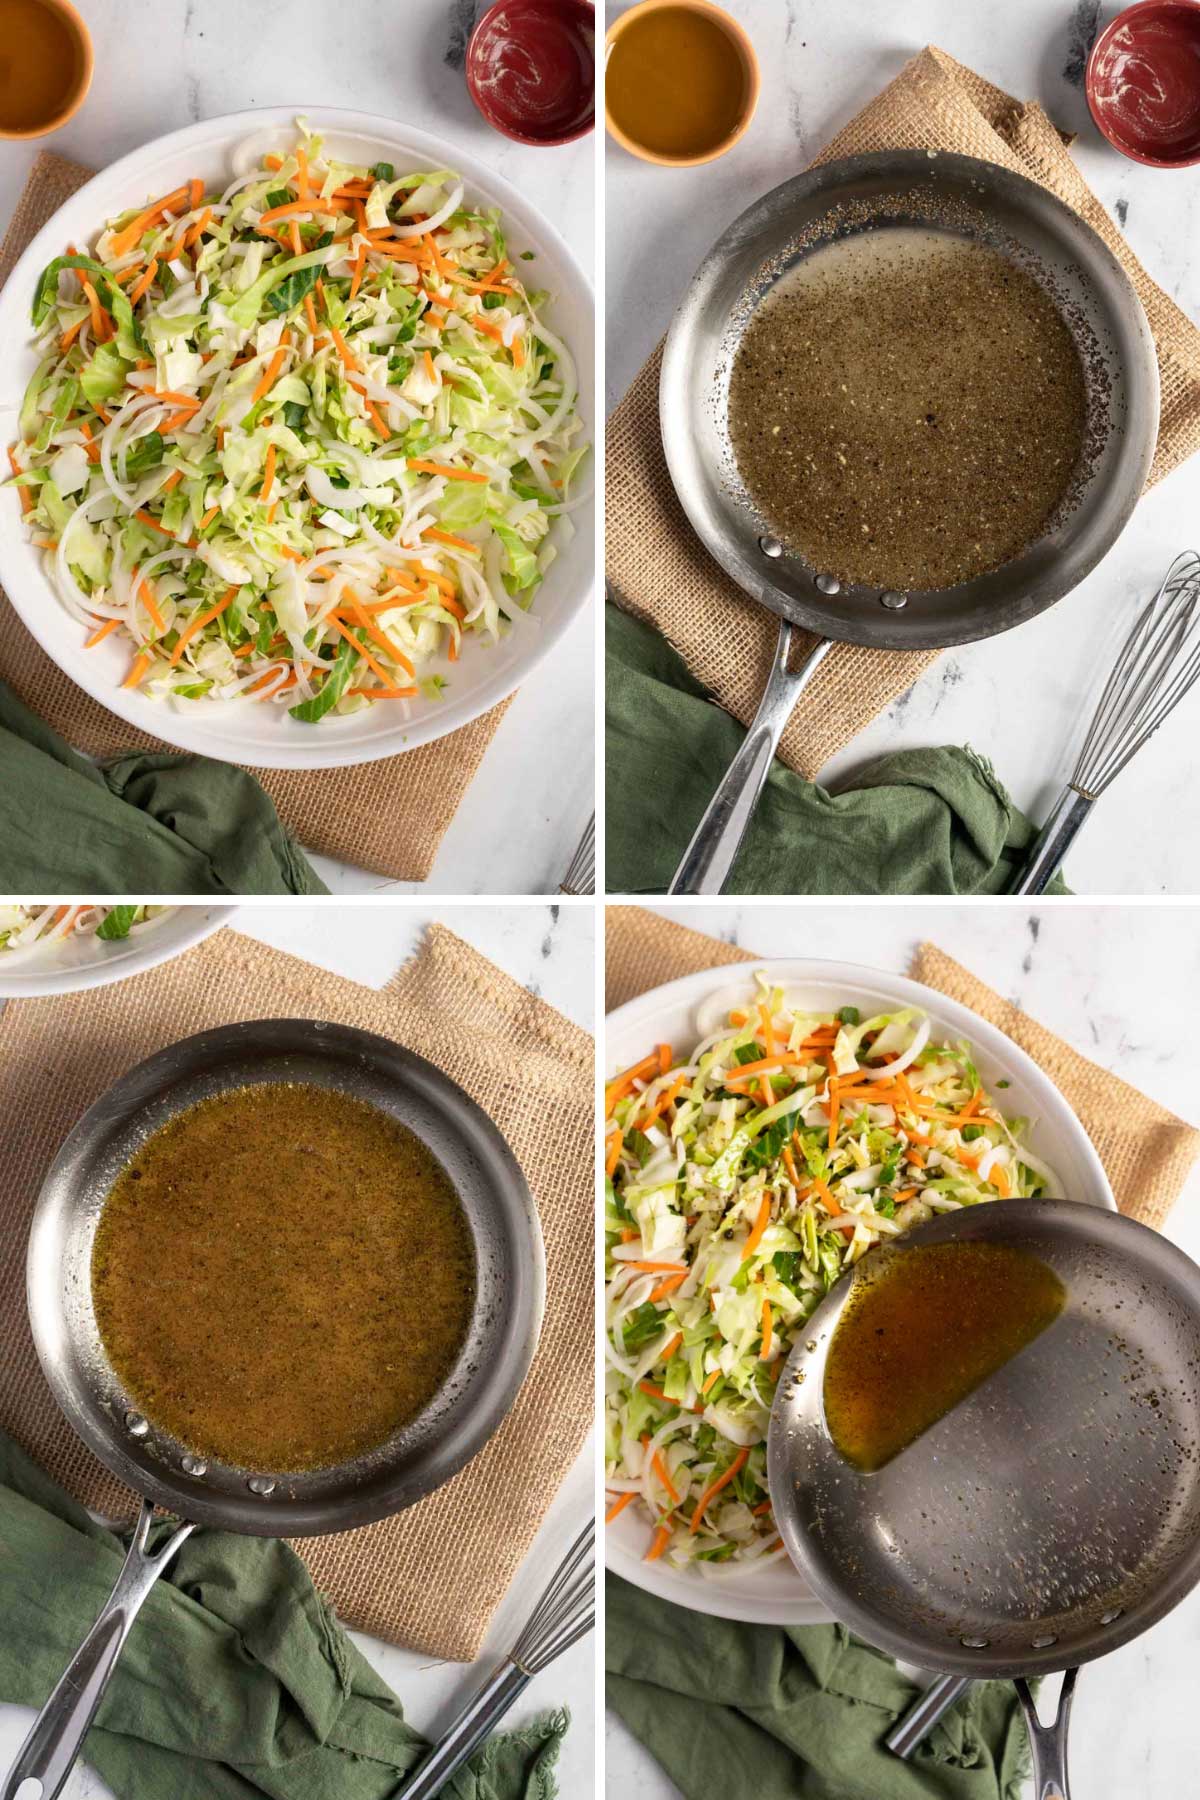 Making oil and vinegar dressing in a small pan.